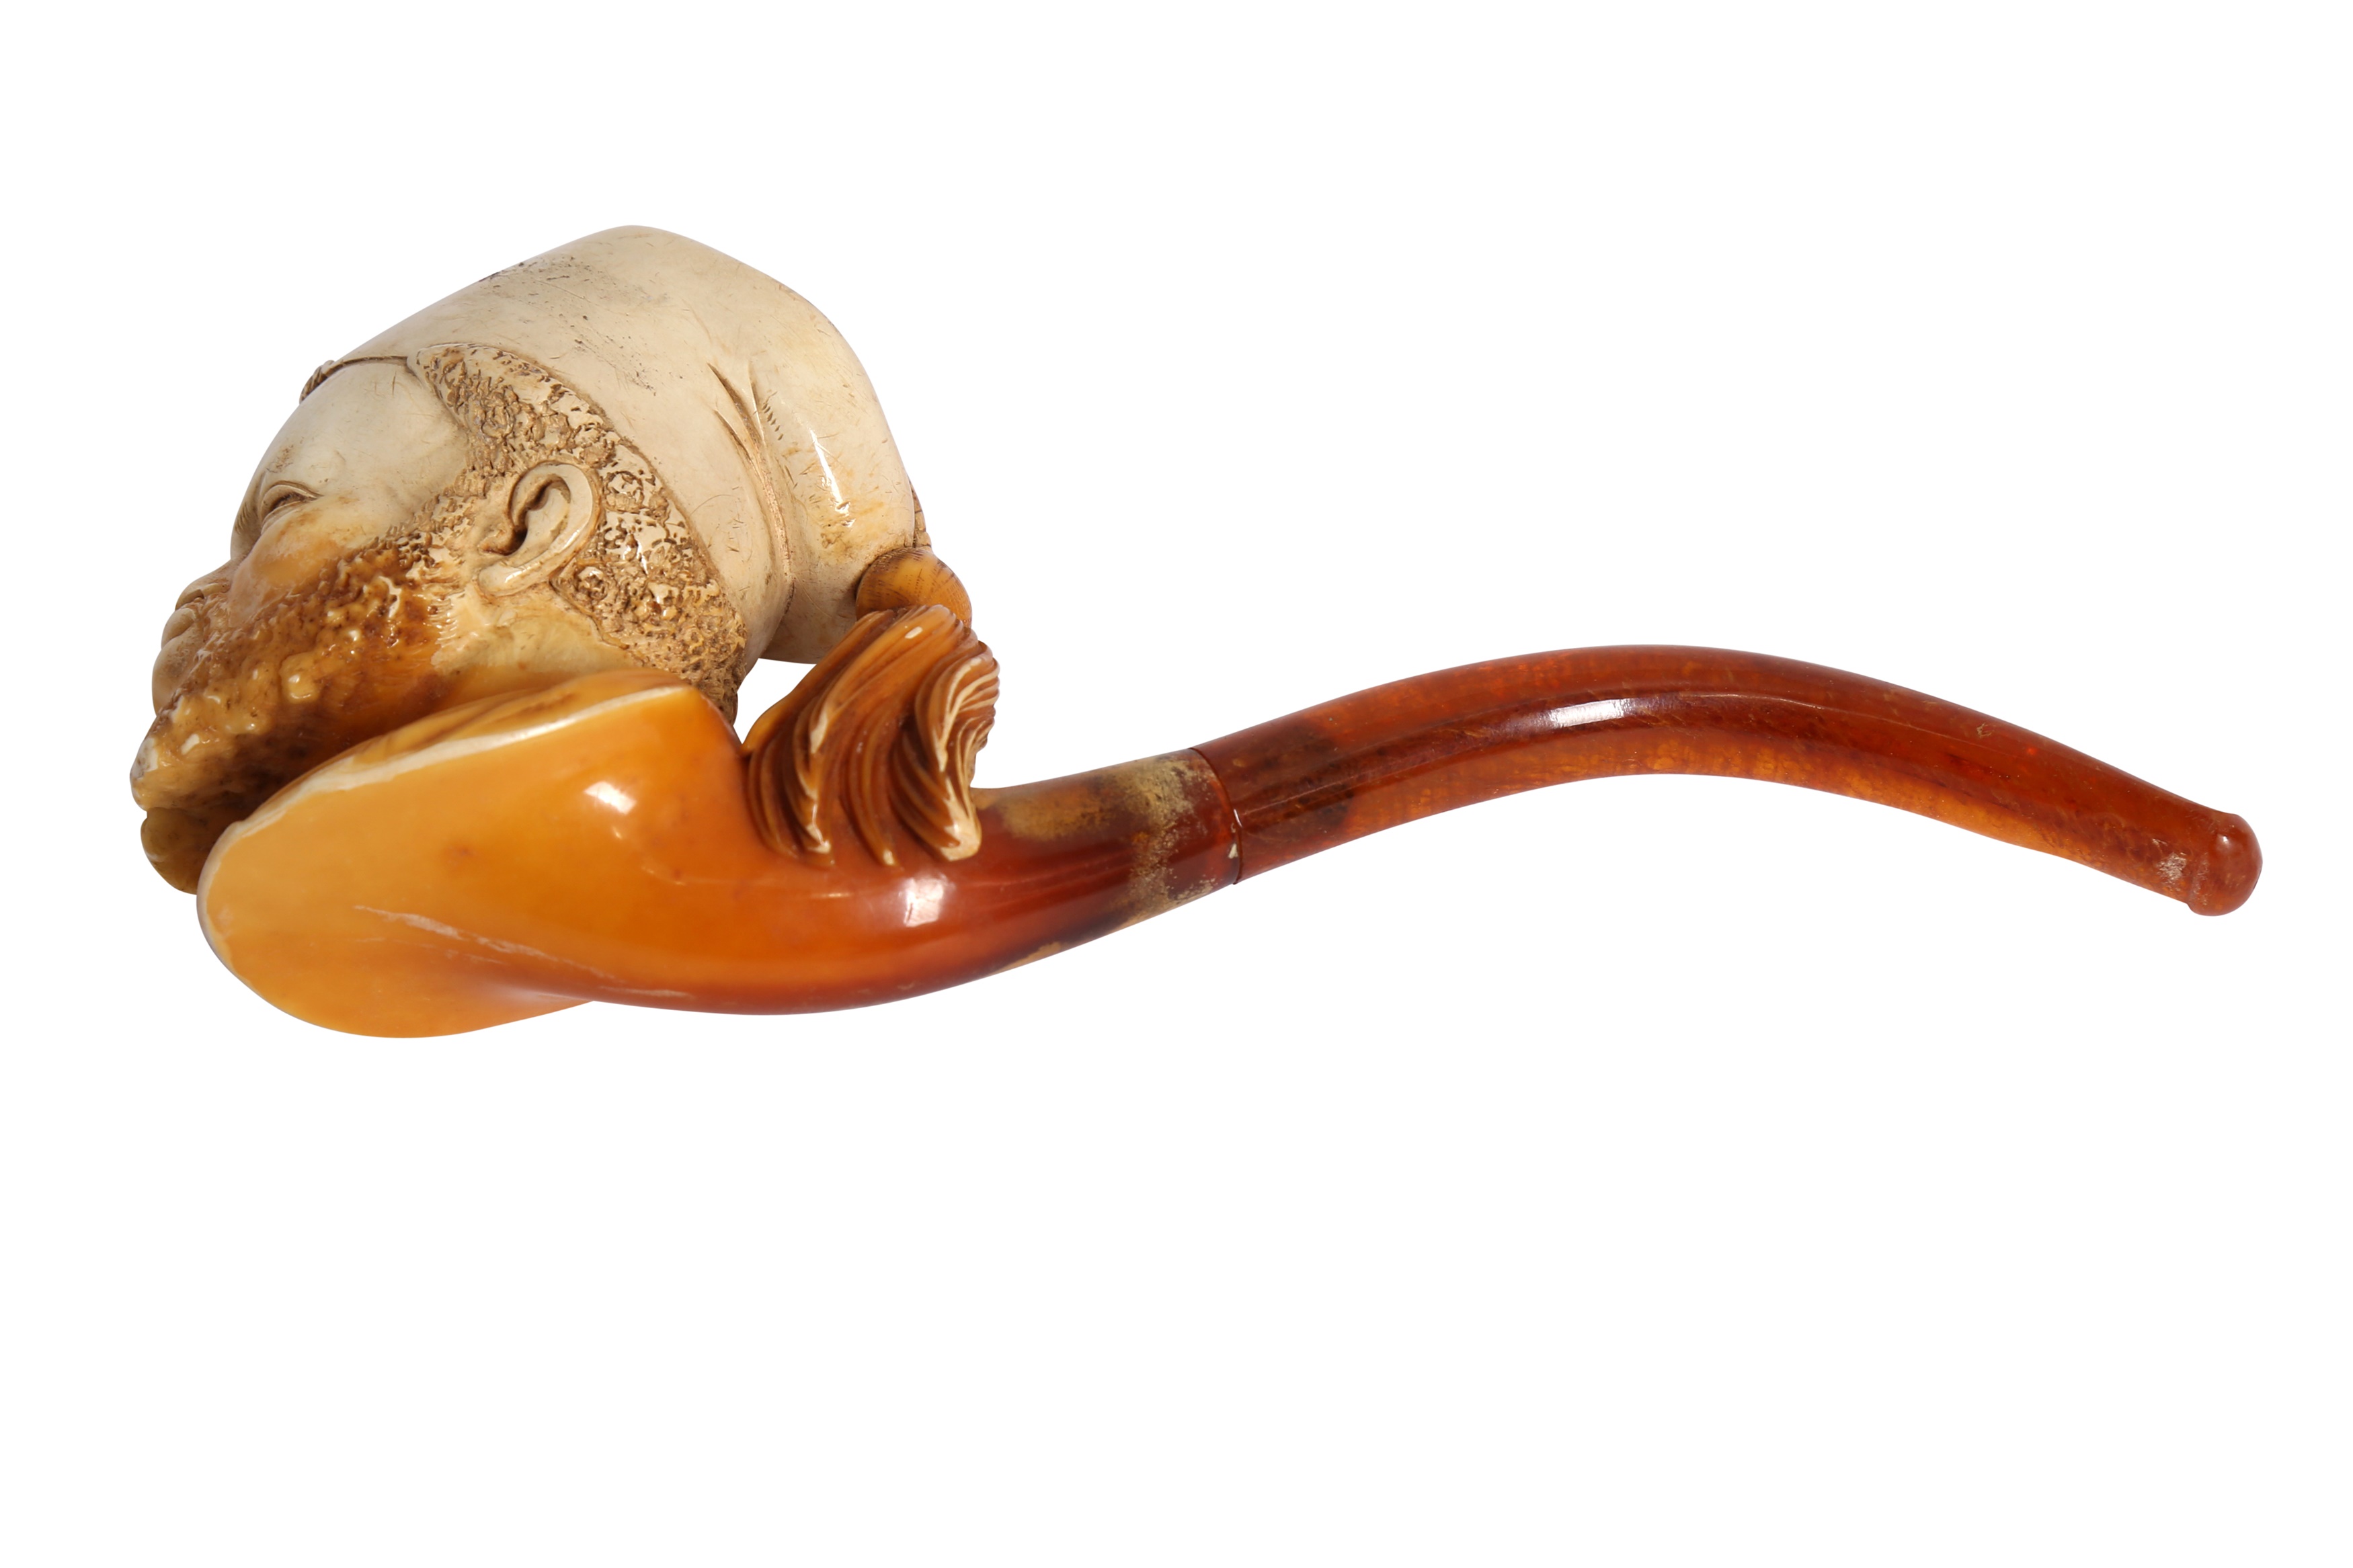 A CASED MEERSCHAUM PIPE WITH A TURKISH PASHA'S HEAD - Image 6 of 6